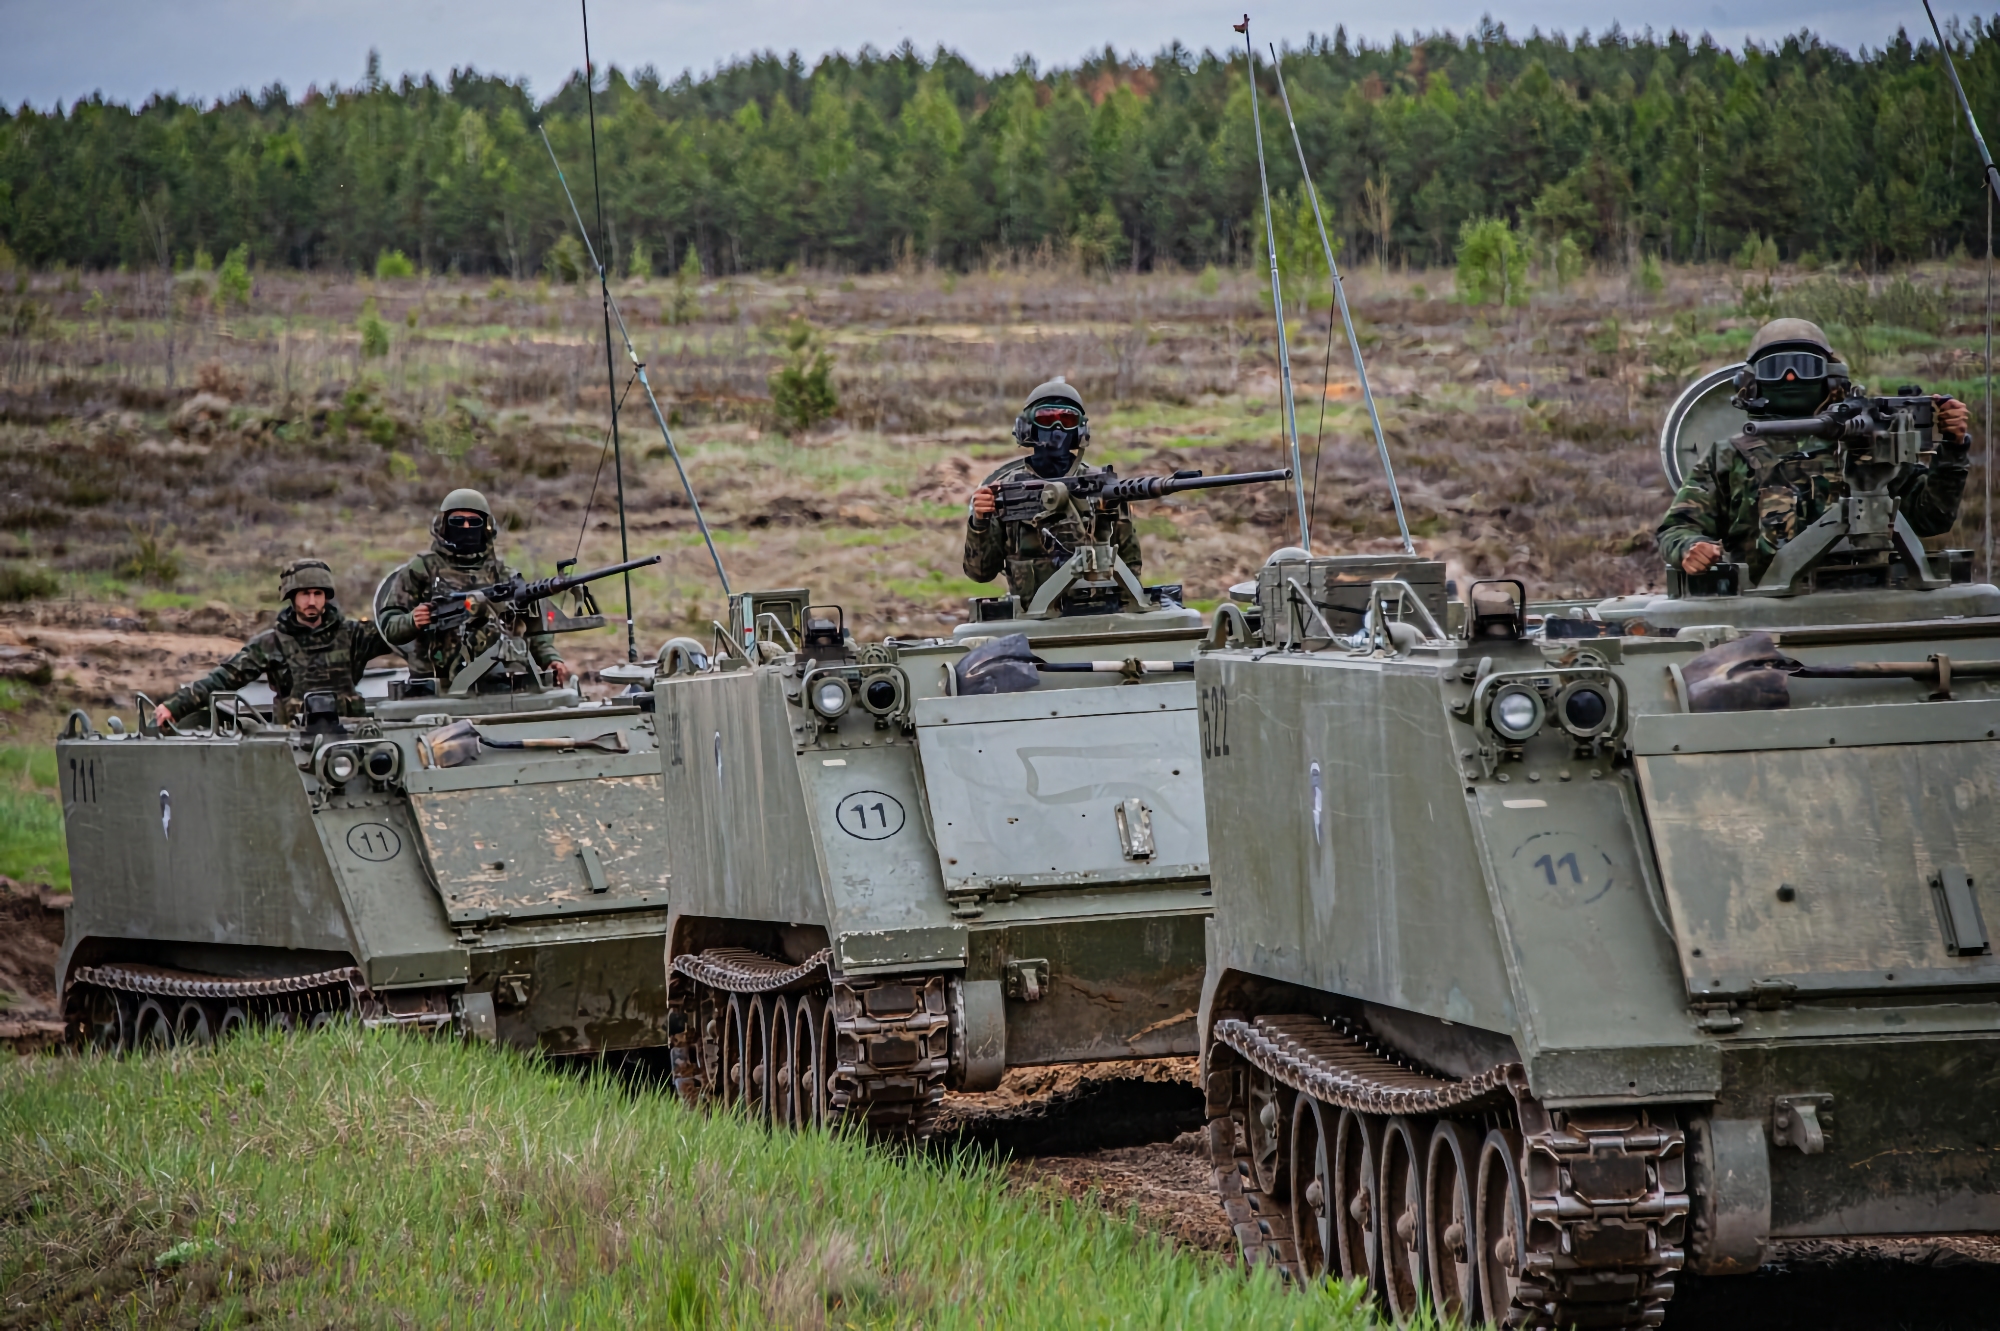 Belgium, the Netherlands and Luxembourg will transfer M113 armoured personnel carriers with remote-controlled weapon systems to the AFU